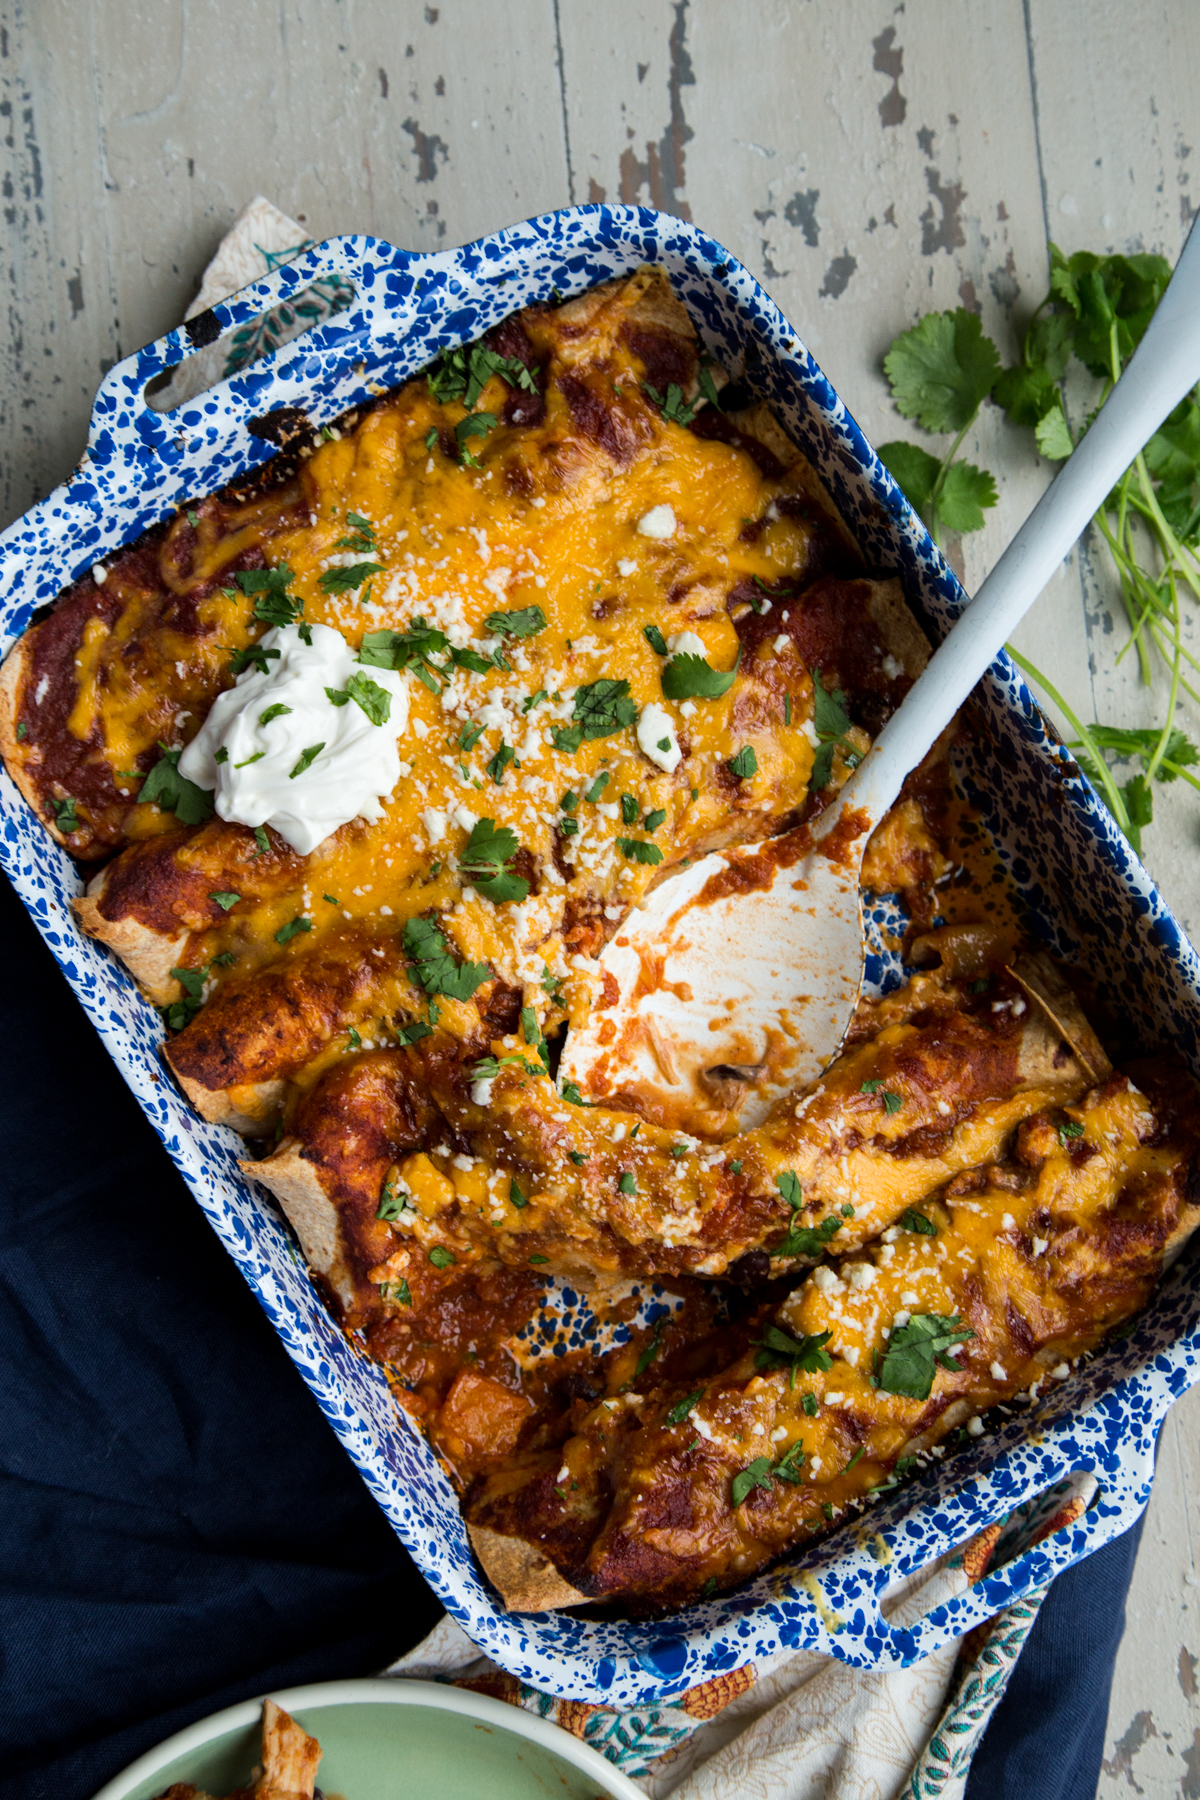 These chipotle butternut squash and black bean chicken enchiladas are going to be a hit! This recipe comes from the cookbook Alaska From Scratch.